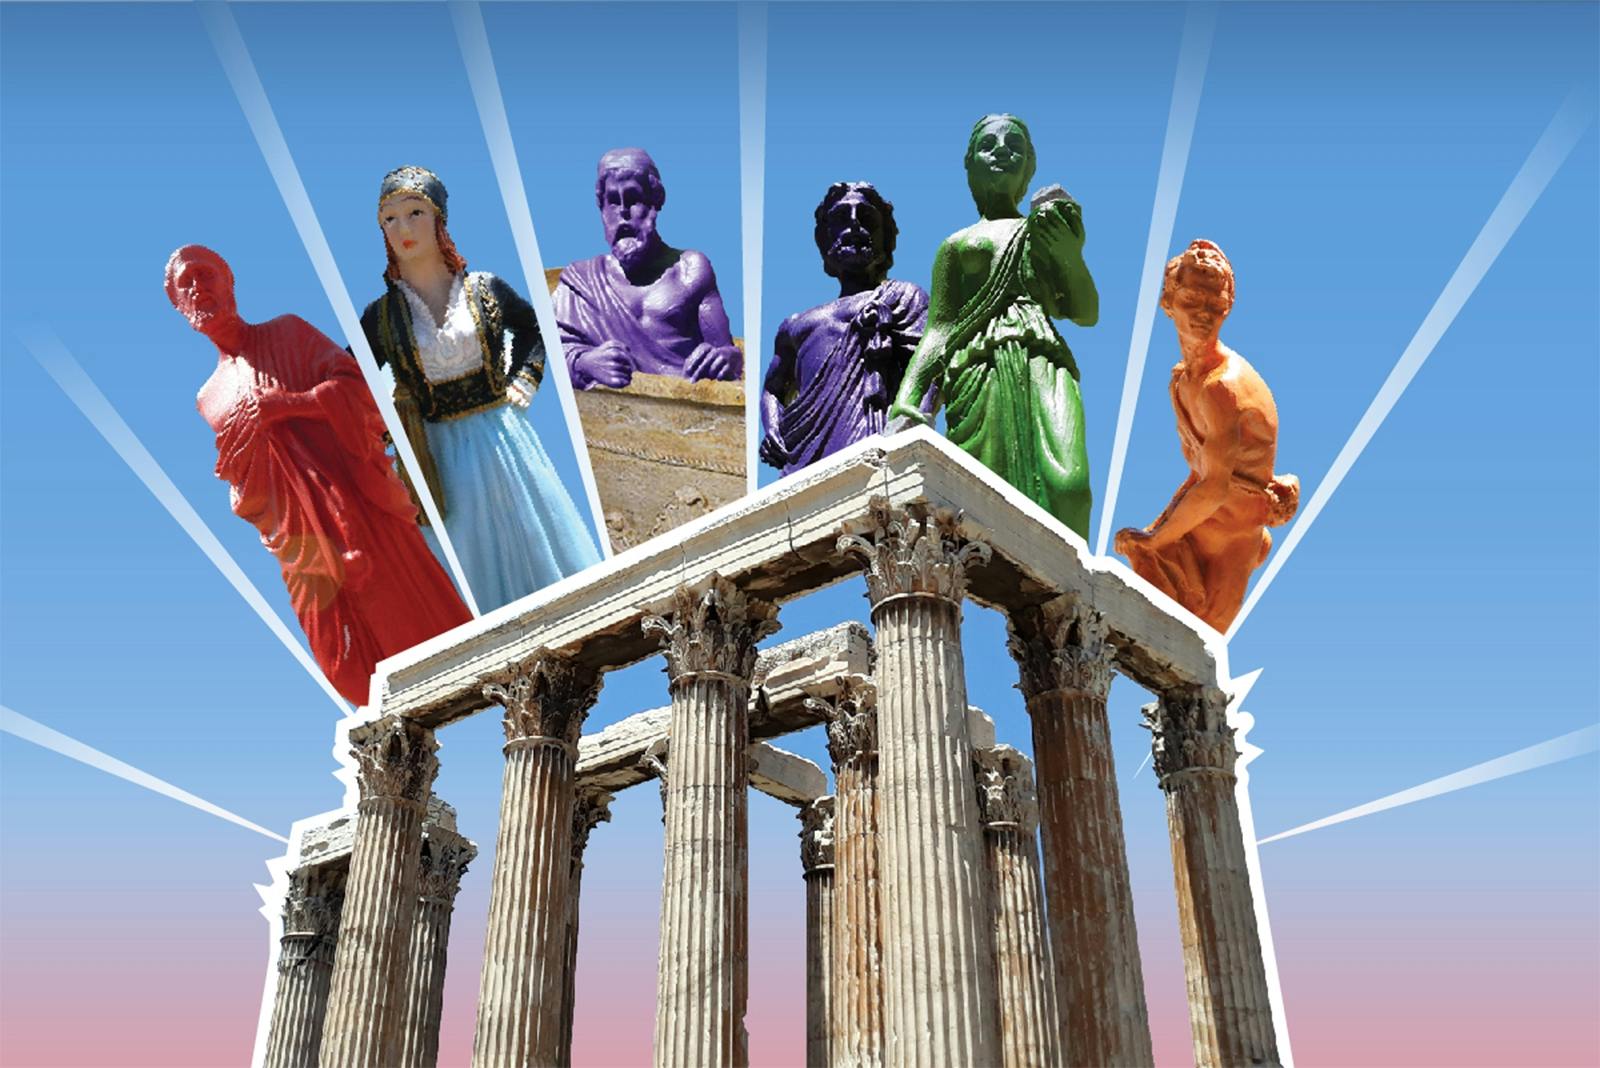 Virtual tour of the Temple of Olympian Zeus from home